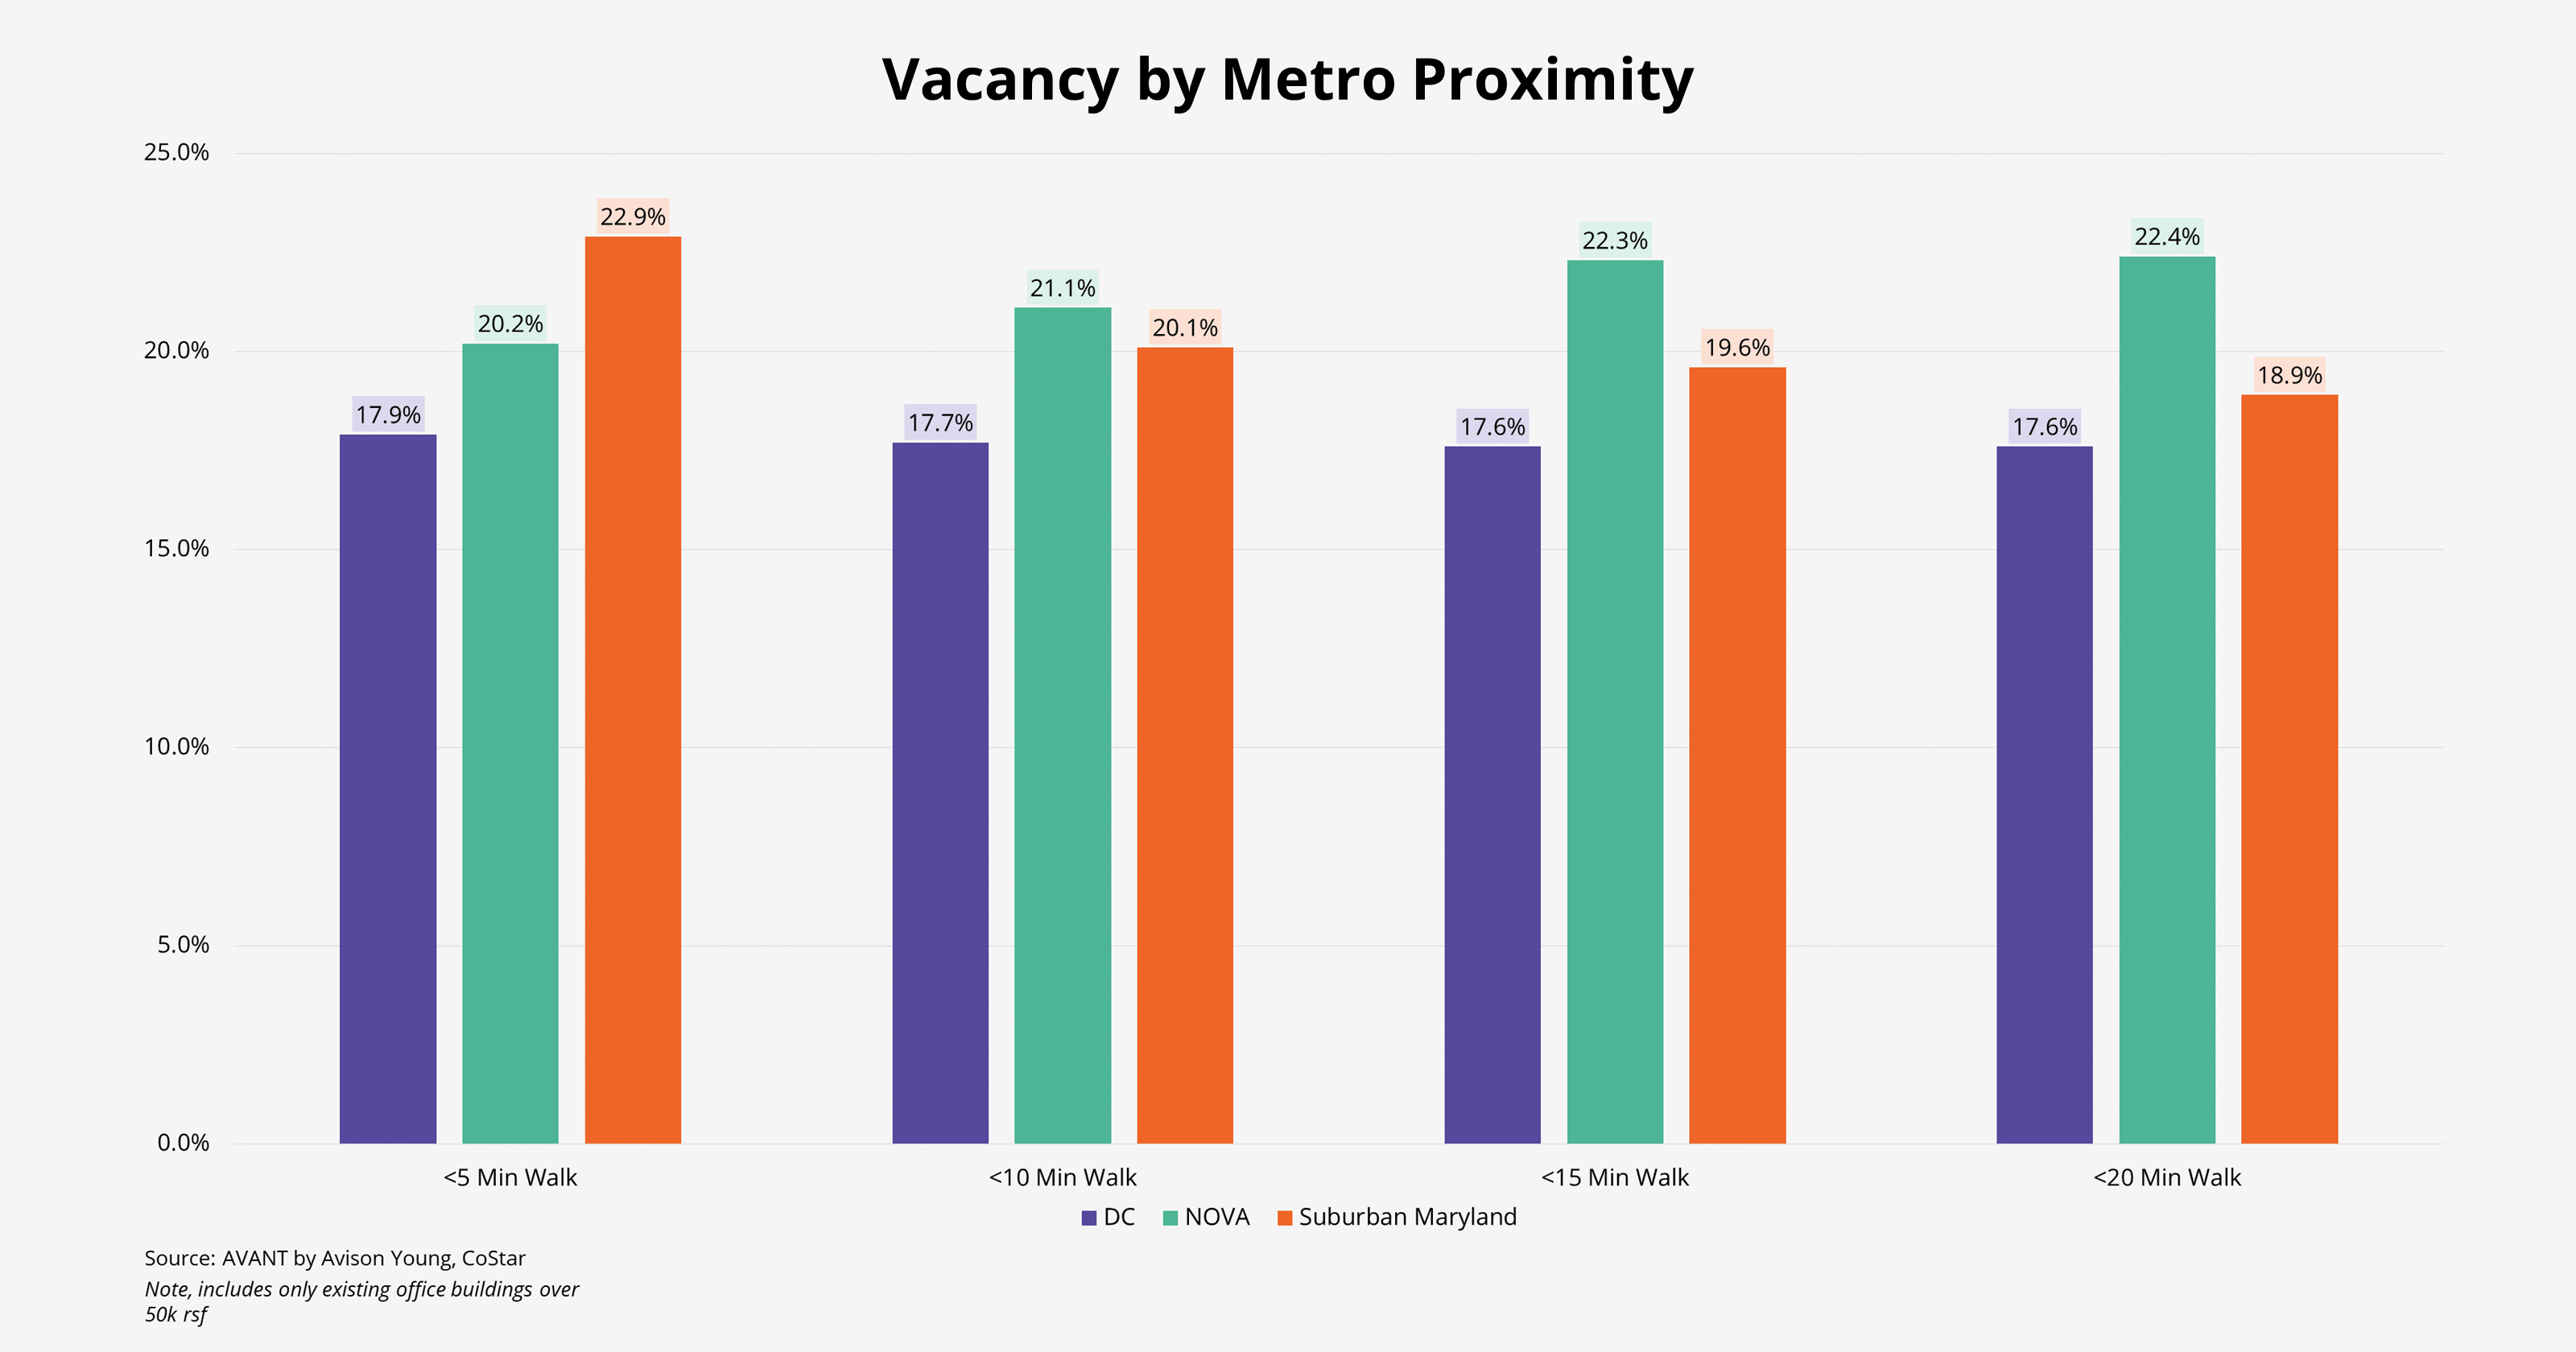 Bar graph comparing rates vacancy rates according to proximity of a metro station